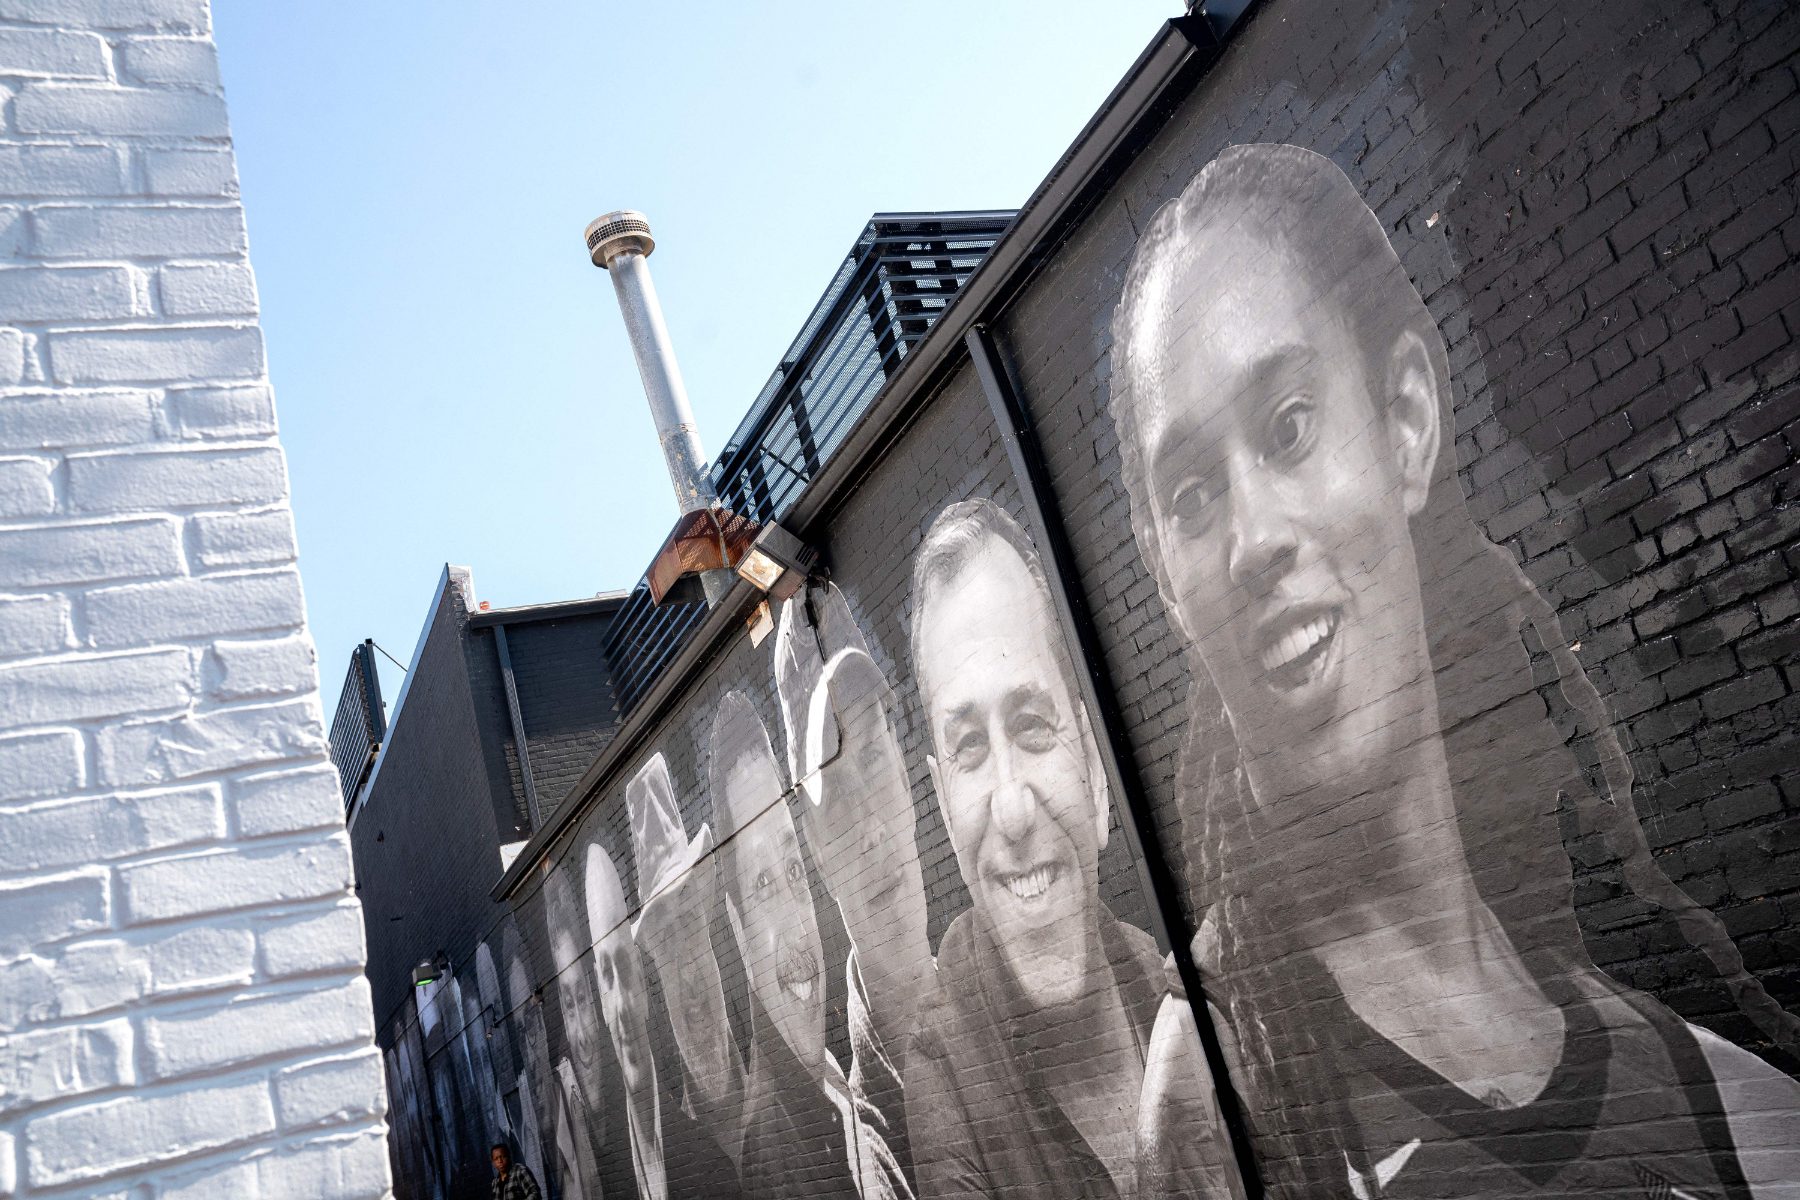 black and white mural by Isaac Campbell in Washington D.C. of Americans held overseas, including WNBA star Brittney Griner